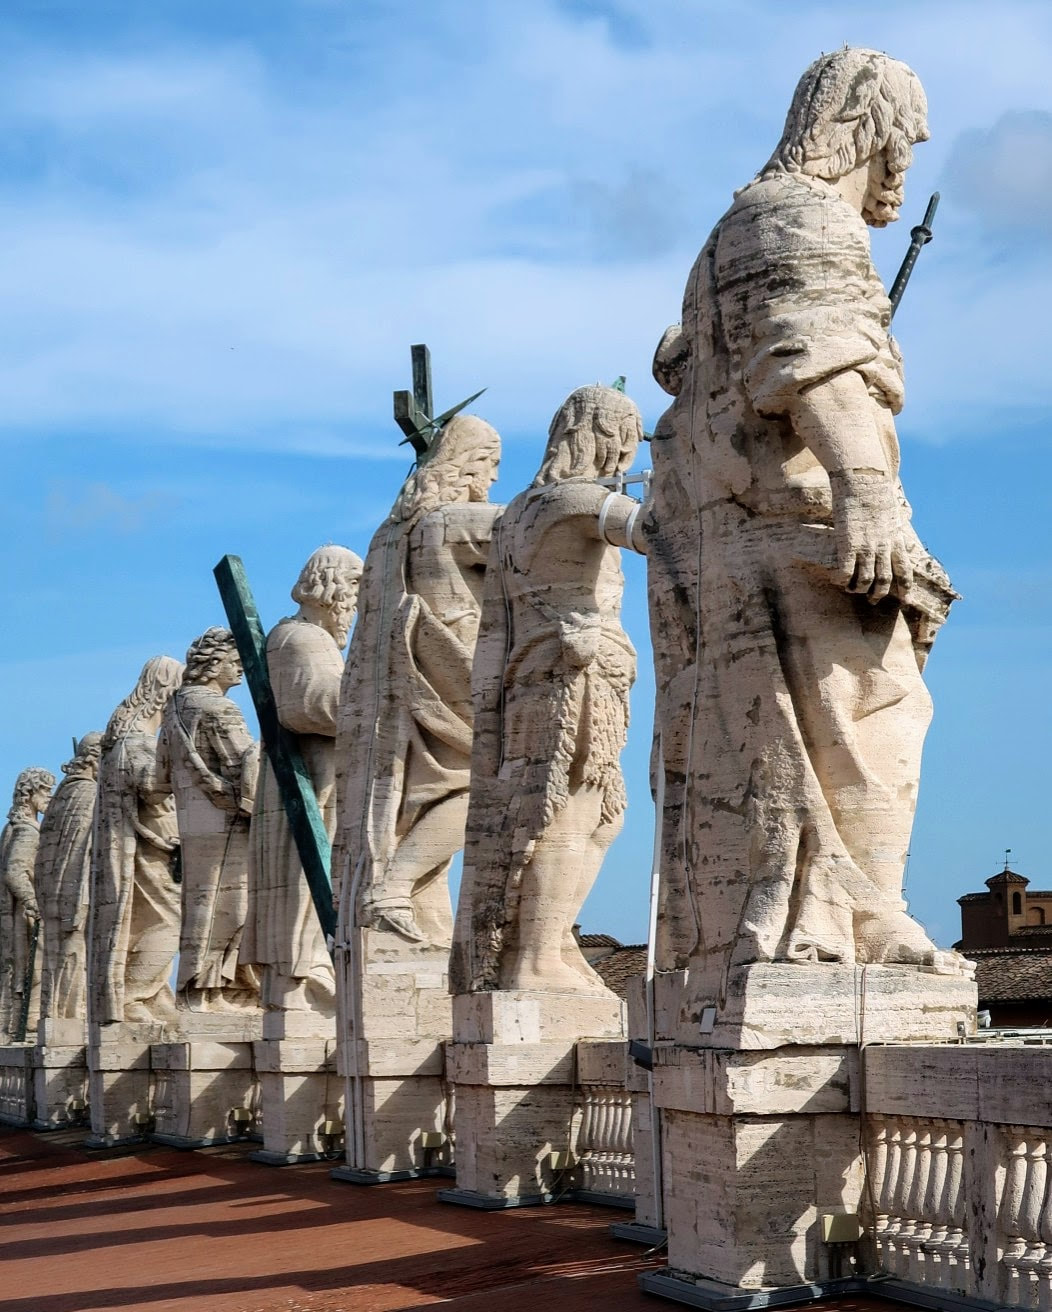 Statues crowning facade of St Peter's Basilica, Rome